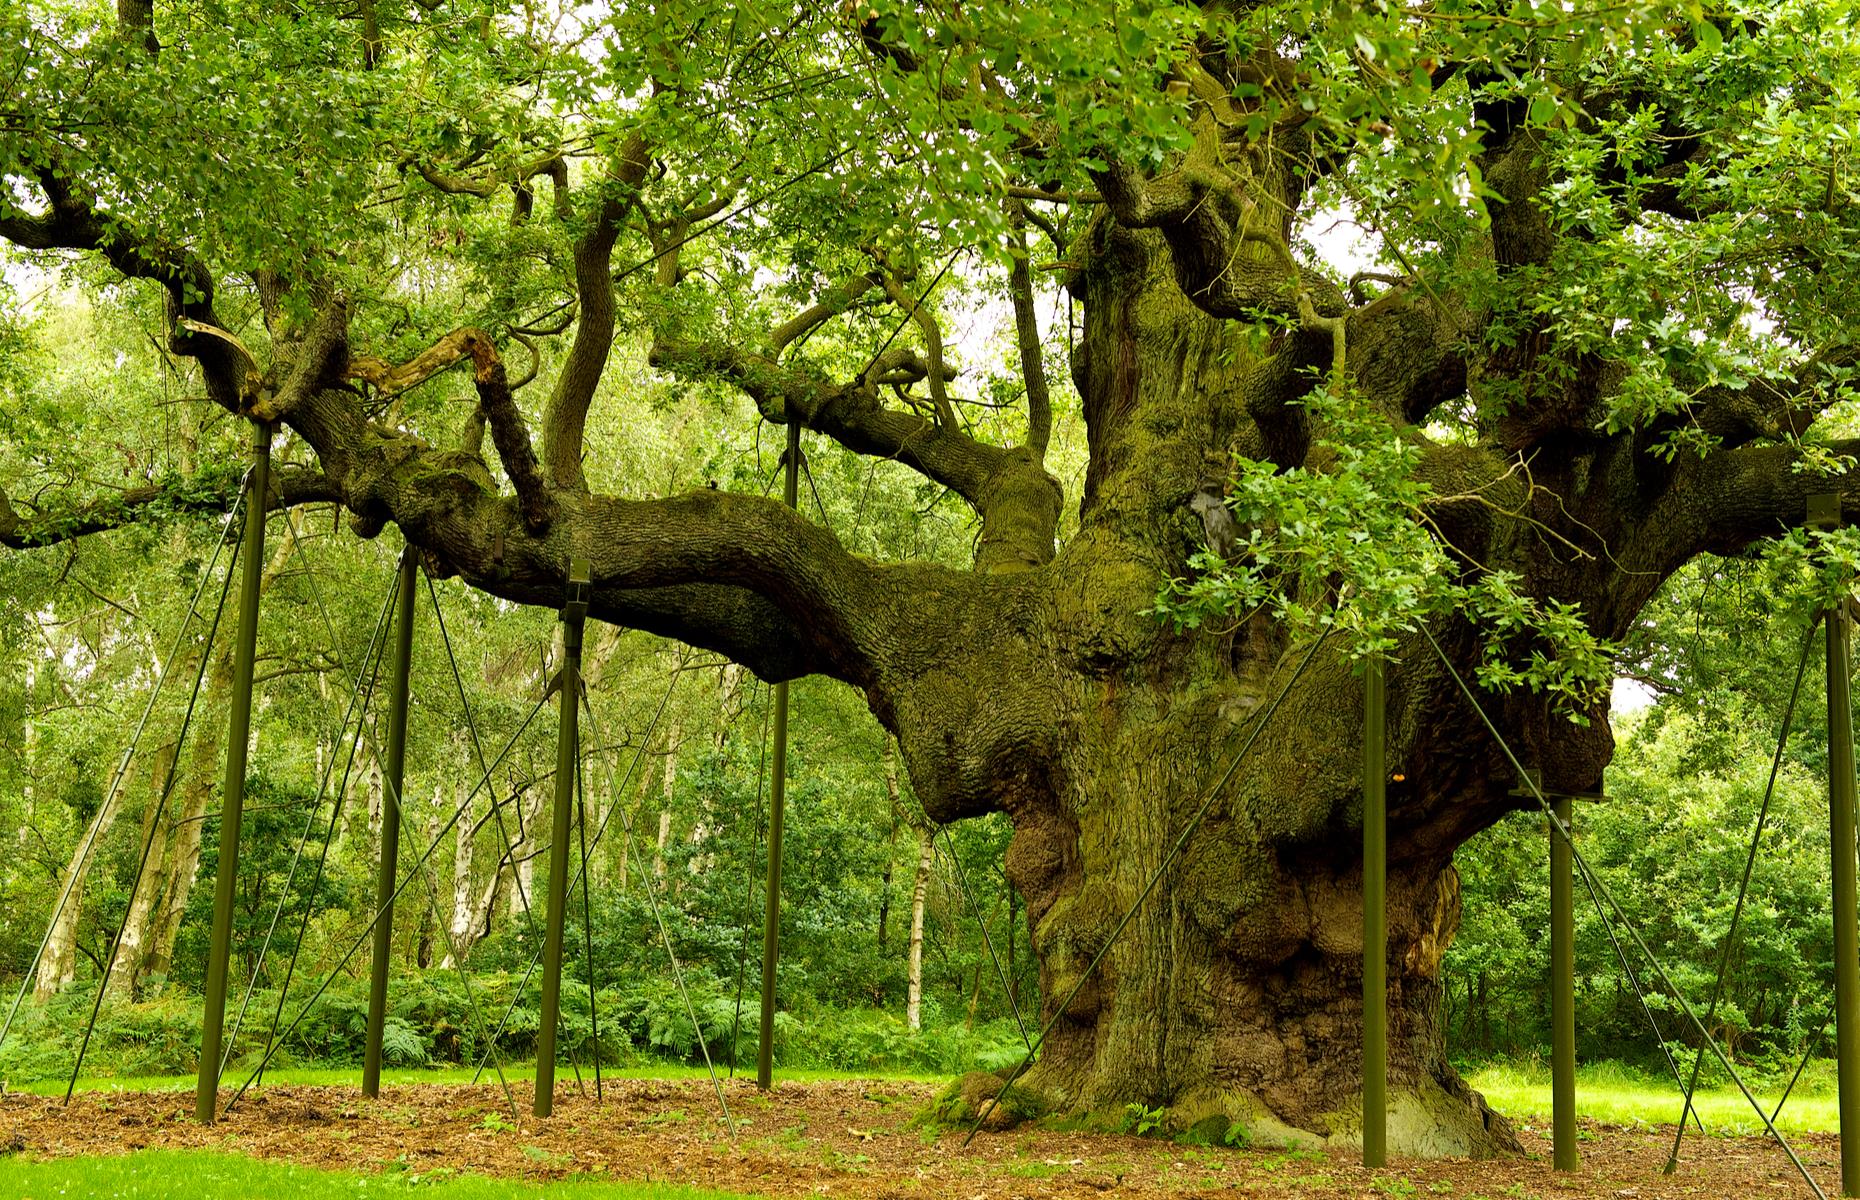 <p>In the 1200s, where most tales place Robin Hood, Sherwood Forest spanned about 100,000 acres, which was around a fifth of the entire county of Nottinghamshire. Meanwhile, its oak and birch woodland would have been the perfect place for fugitives to hide out. Be sure to visit the large English oak tree, known as the Major Oak, that's between 800 and 1,000 years old and was allegedly where Robin and his merry men took shelter.</p>